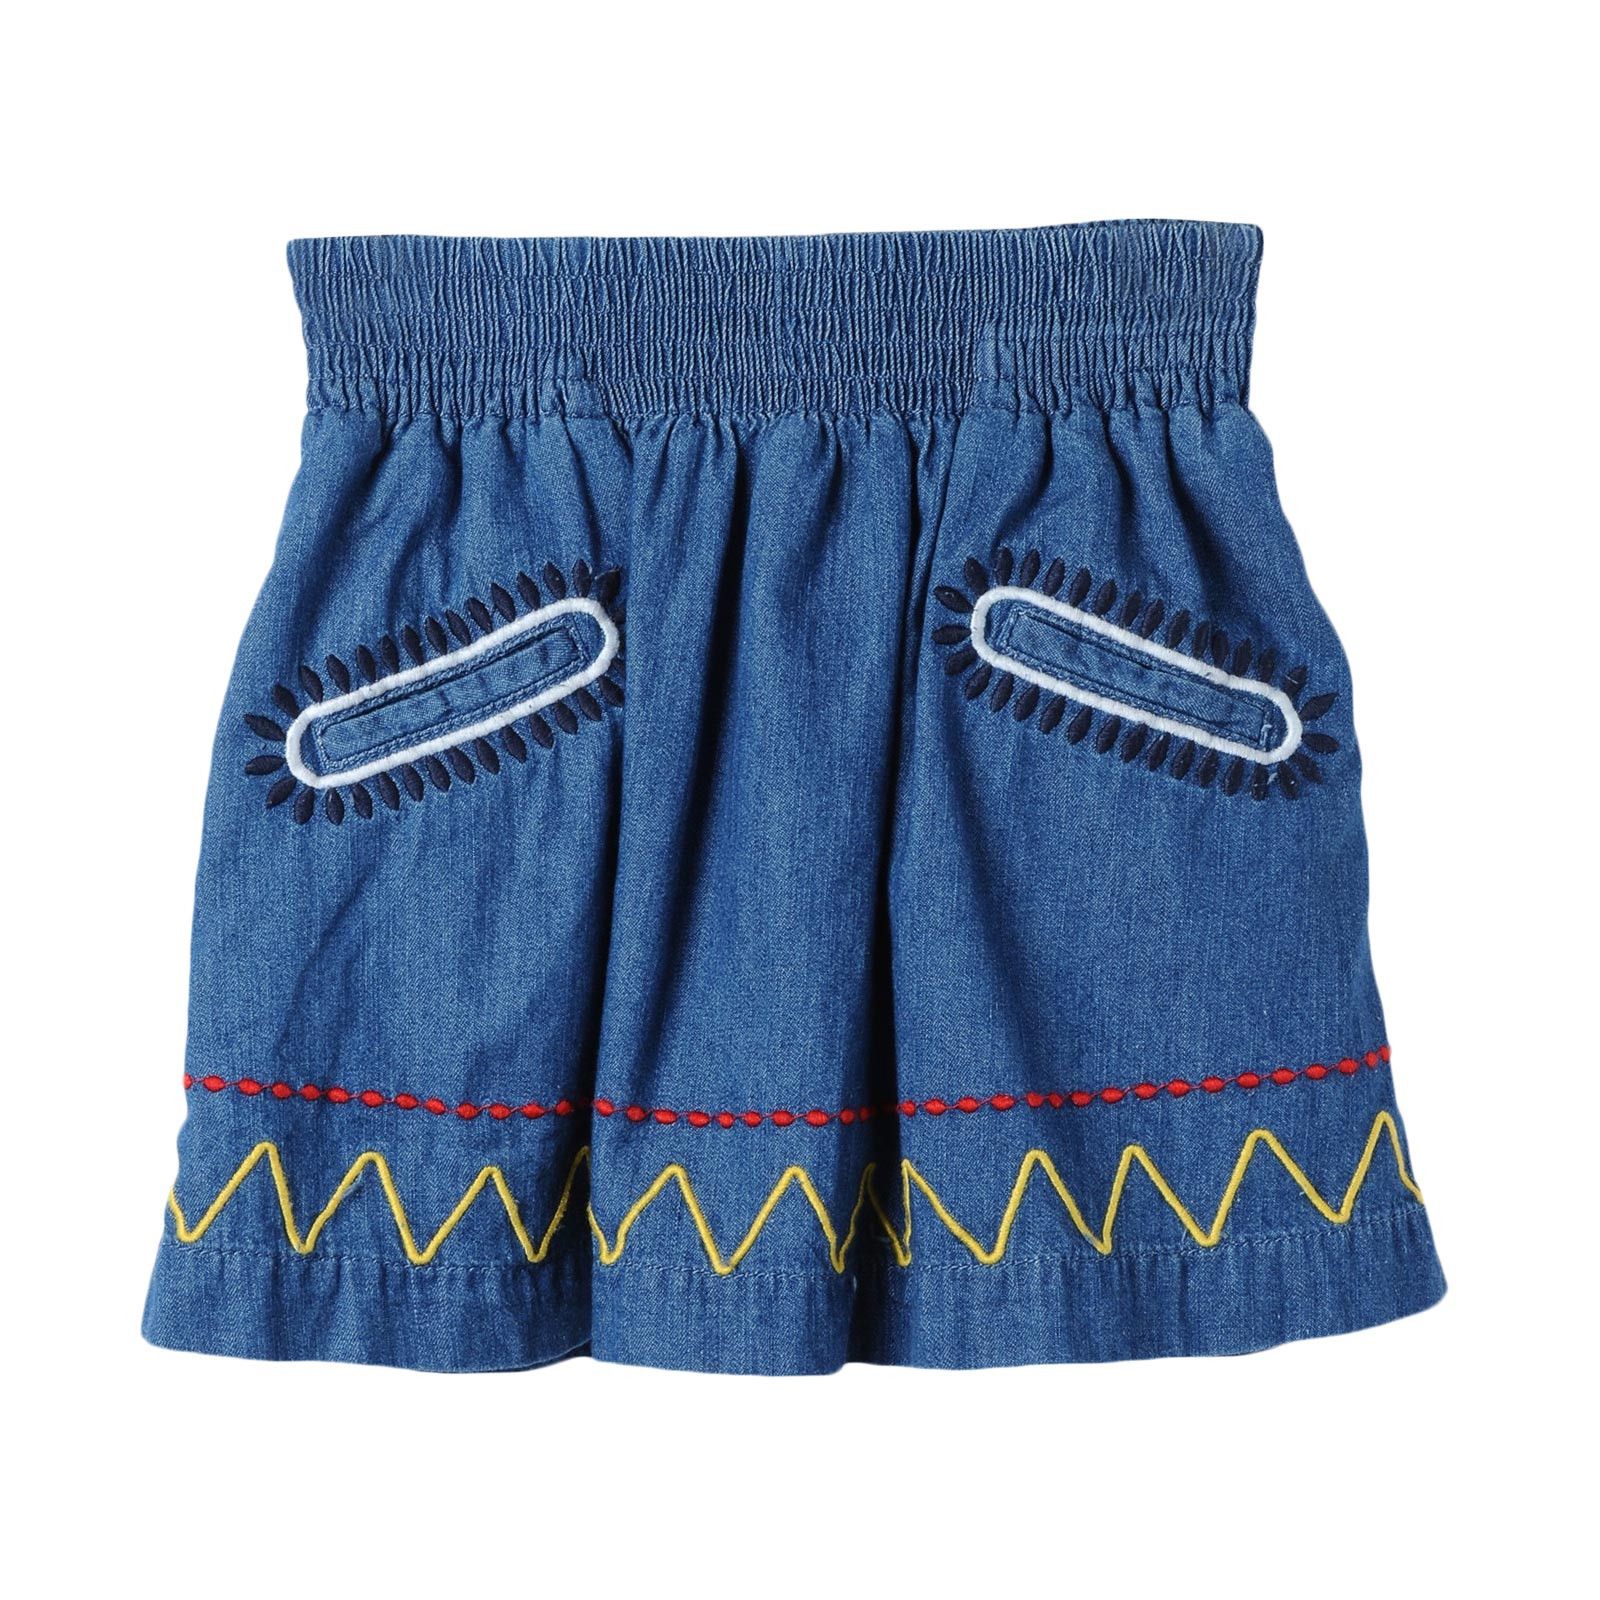 Girls Blue Denim Chambray Skirt With Colorful Zig Zag Embroidered Trims - CÉMAROSE | Children's Fashion Store - 1